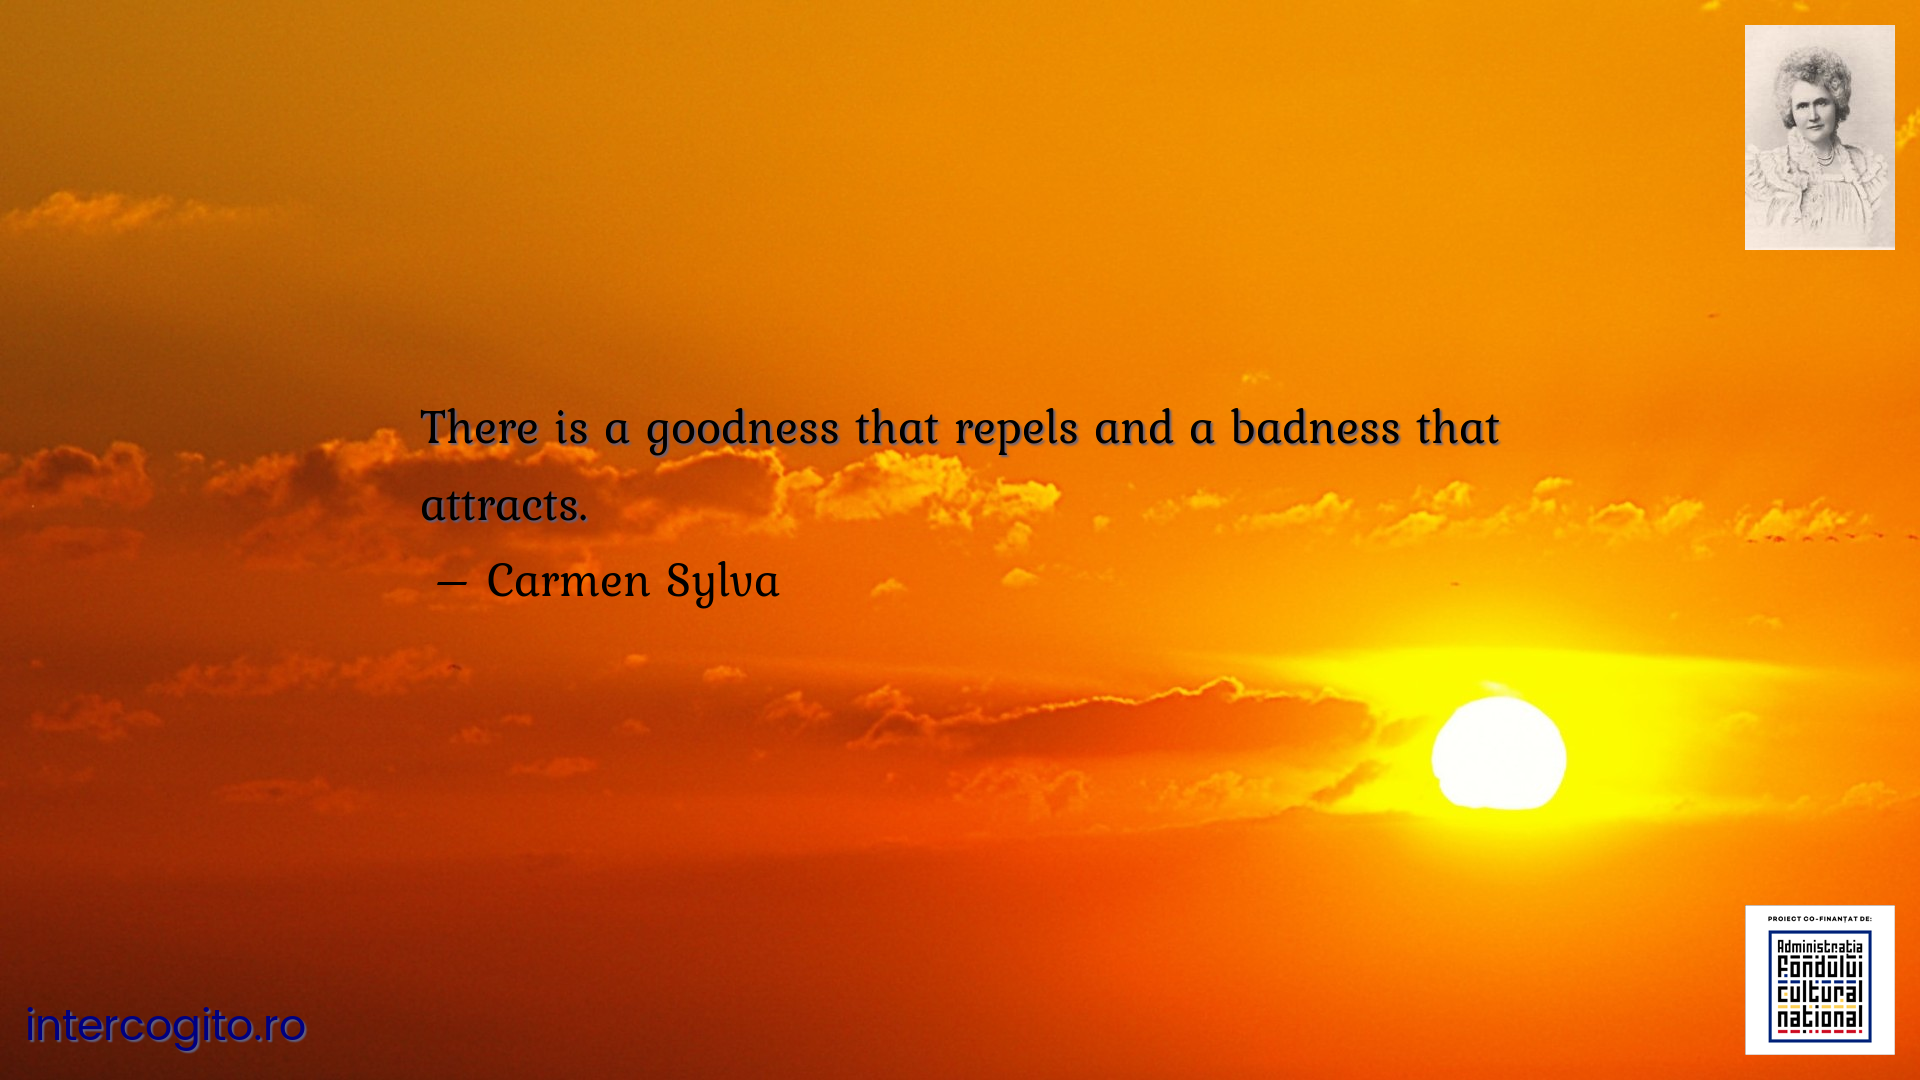 There is a goodness that repels and a badness that attracts.